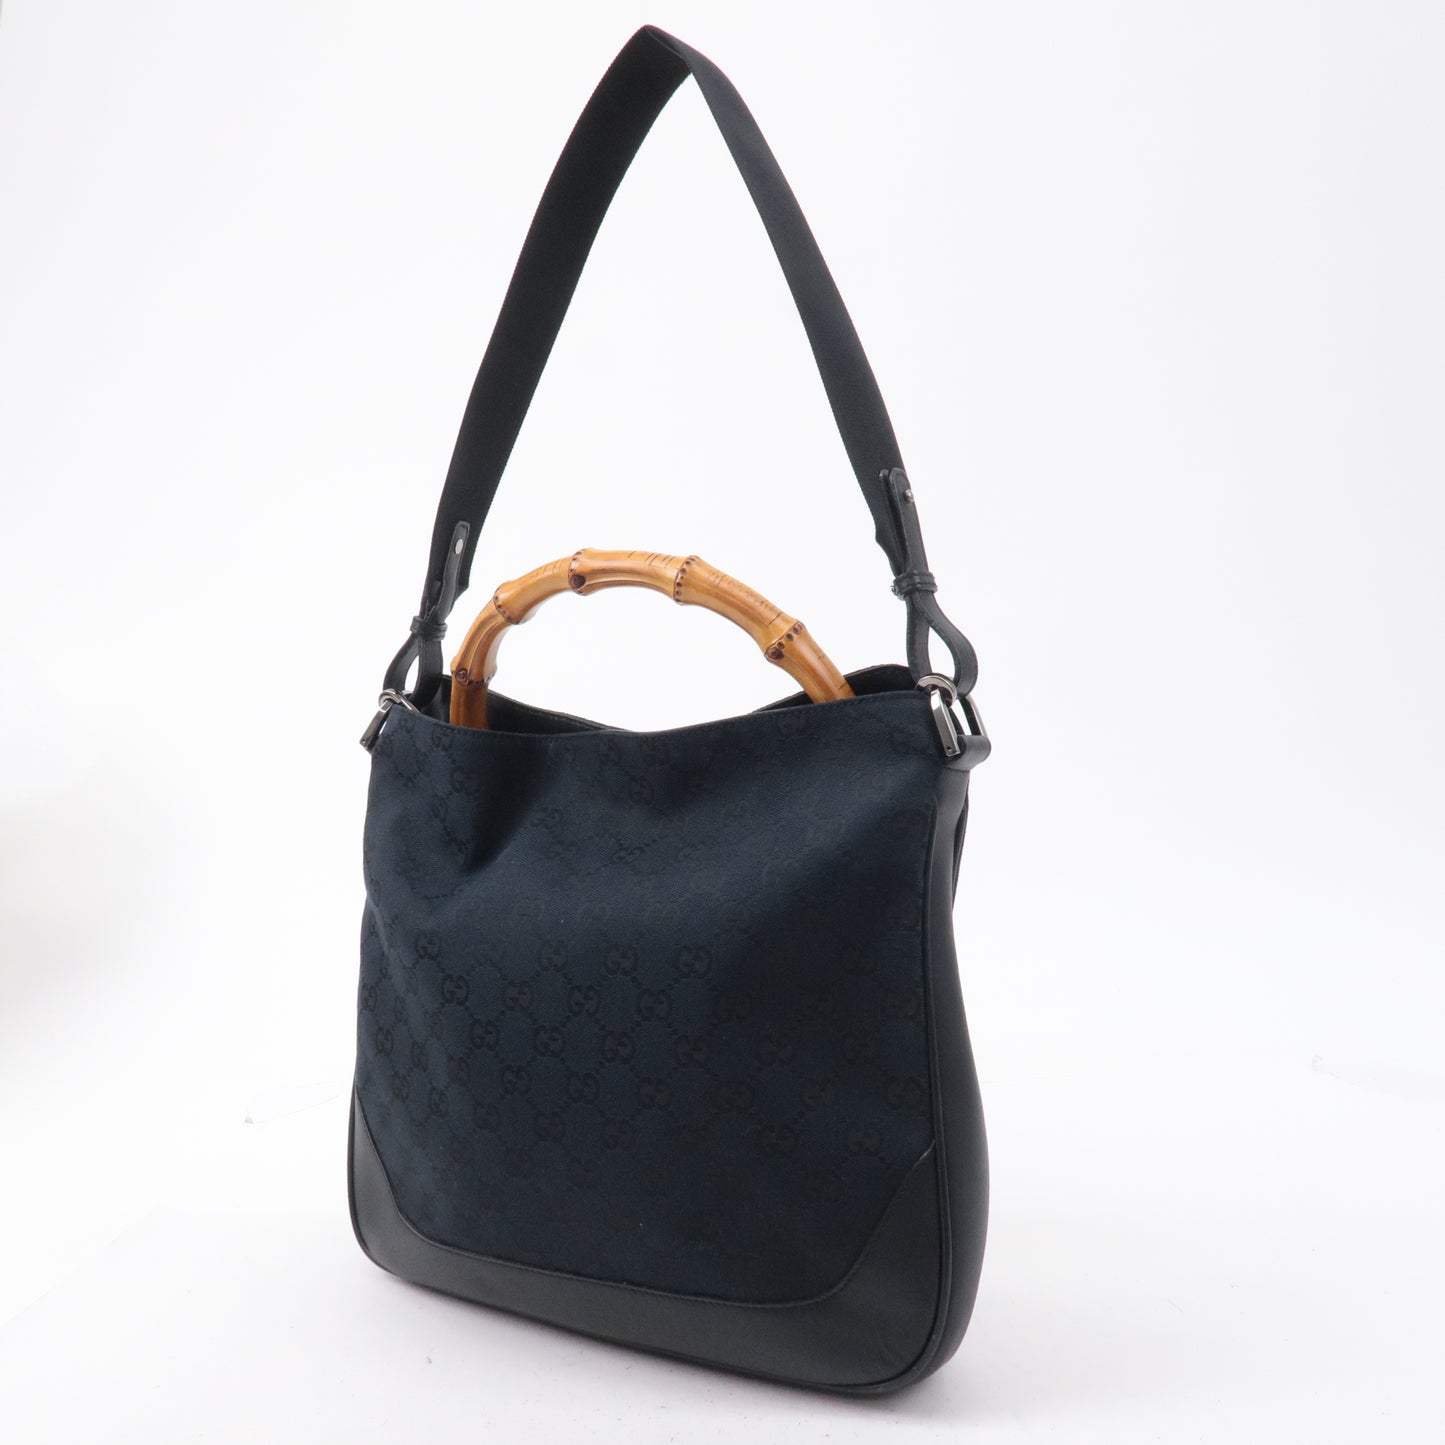 GUCCI Bamboo GG Canvas Leather 2Way Shoulder Bag Black 001.4095